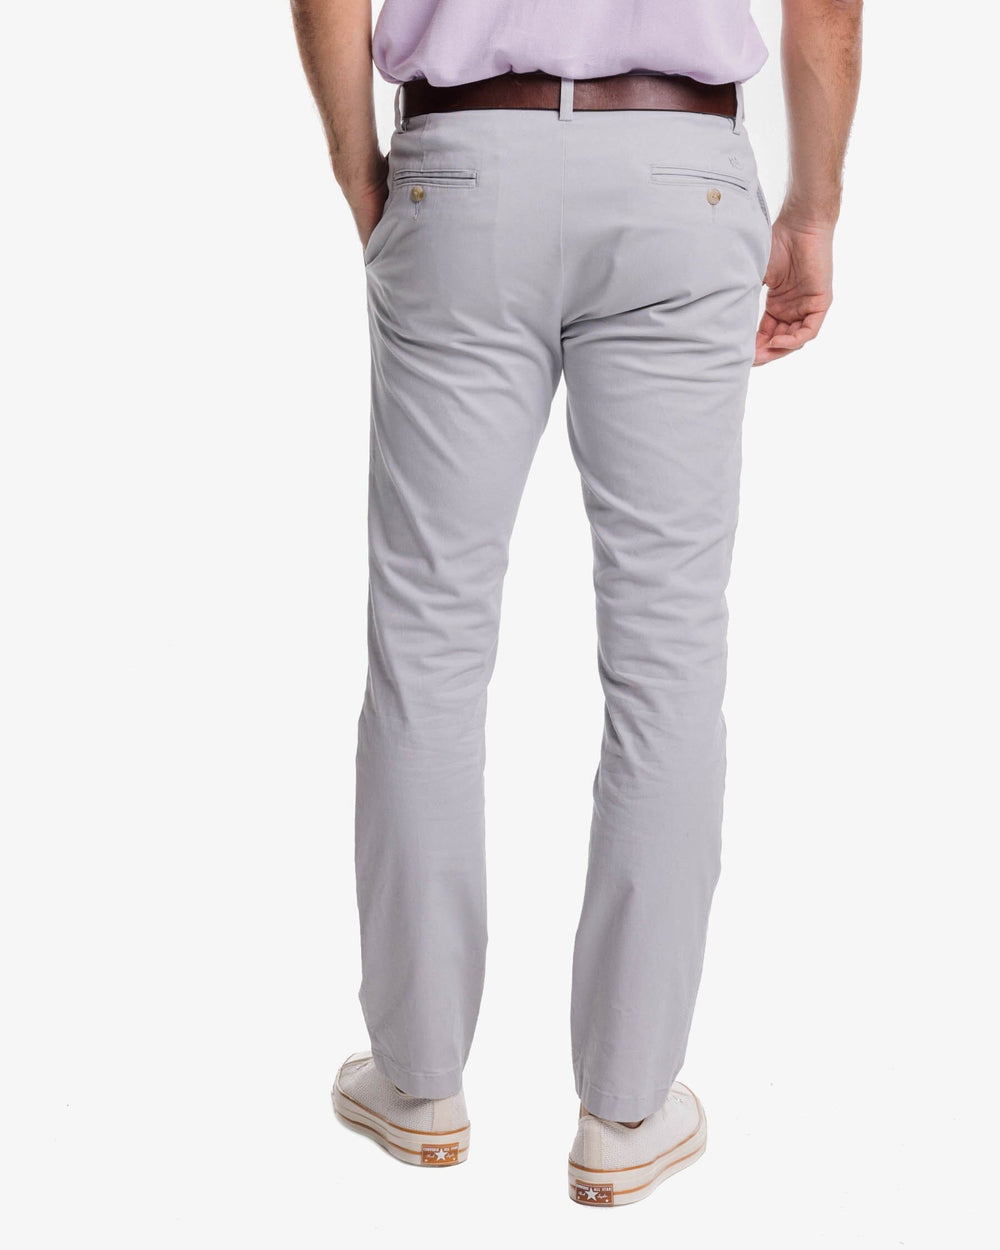 The back view of the Southern Tide Channel Marker Chino Pant by Southern Tide - Seagull Grey